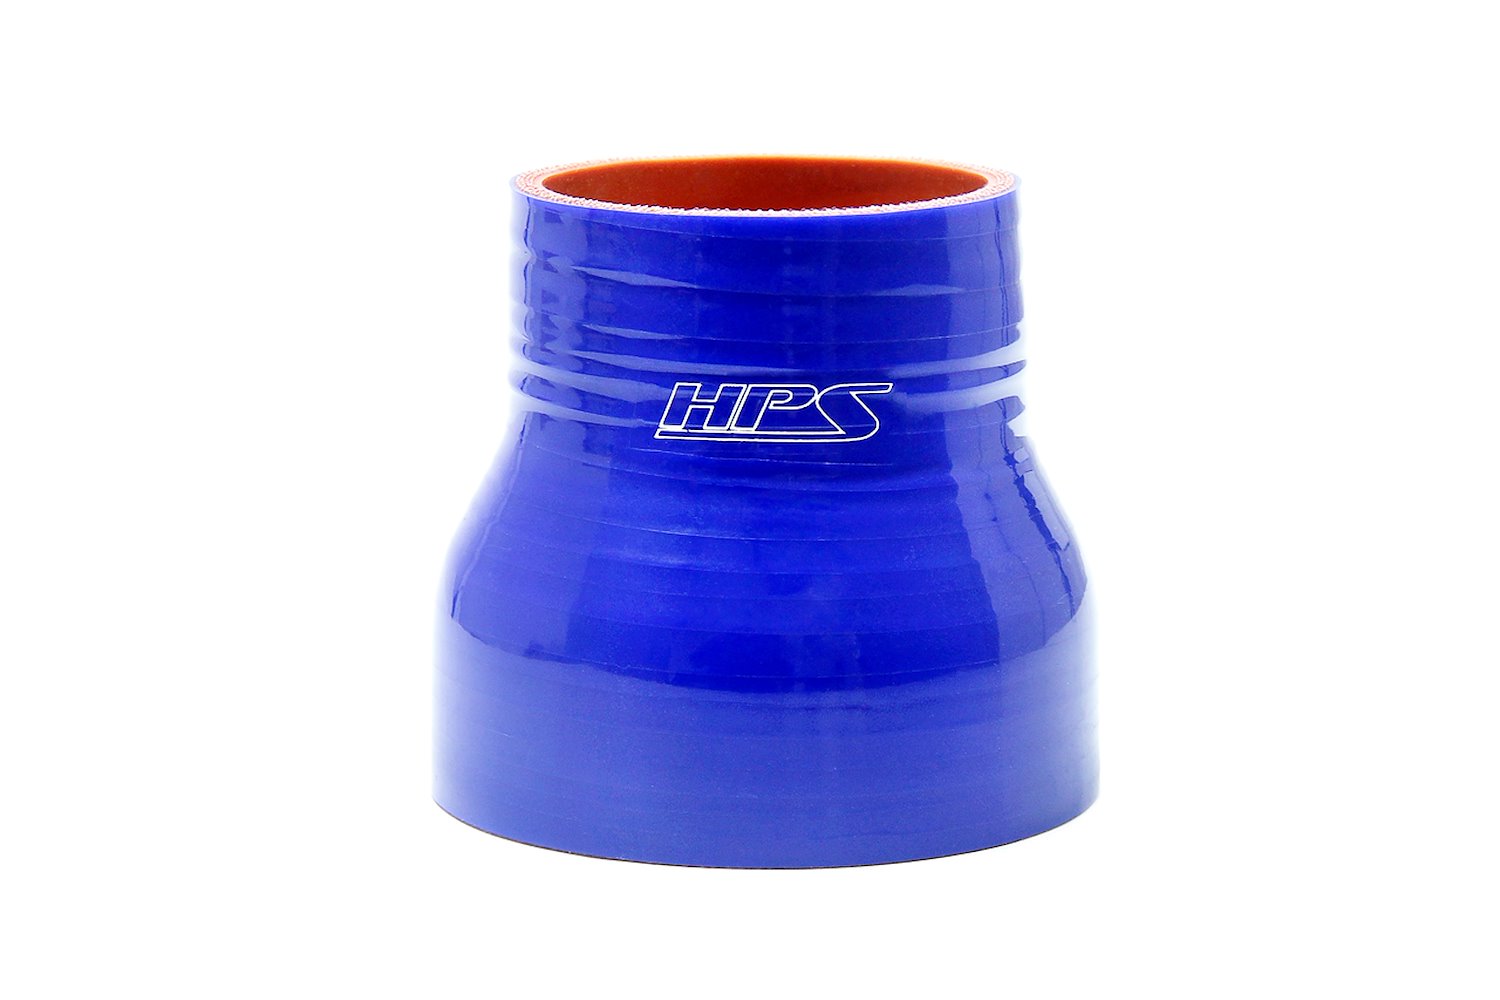 HTSR-300-450-L6-BLUE Silicone Reducer Hose, High-Temp 4-Ply Reinforced, 3 in. - 4-1/2 in. ID, 6 in. Long, Blue